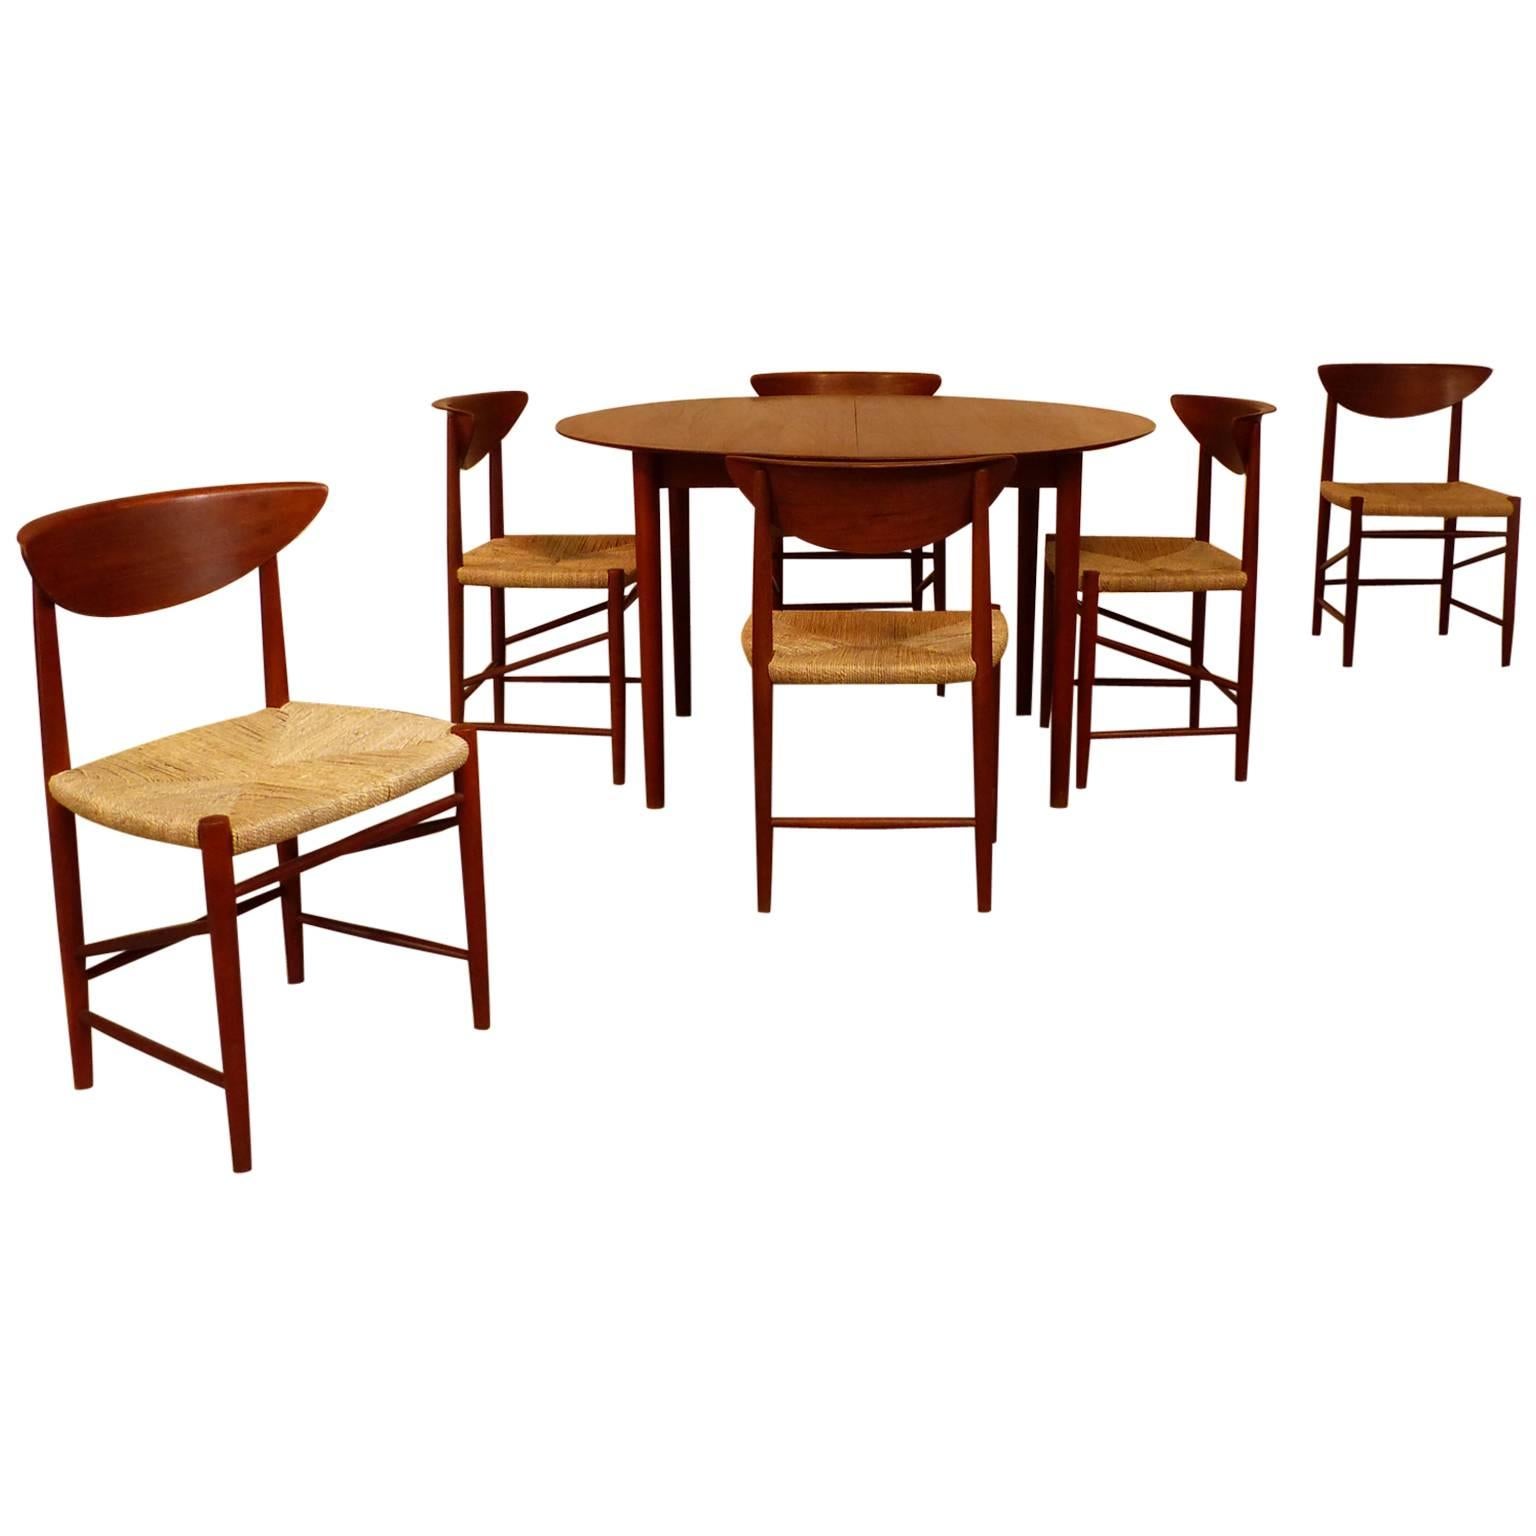 Peter Hvidt Table and Chairs